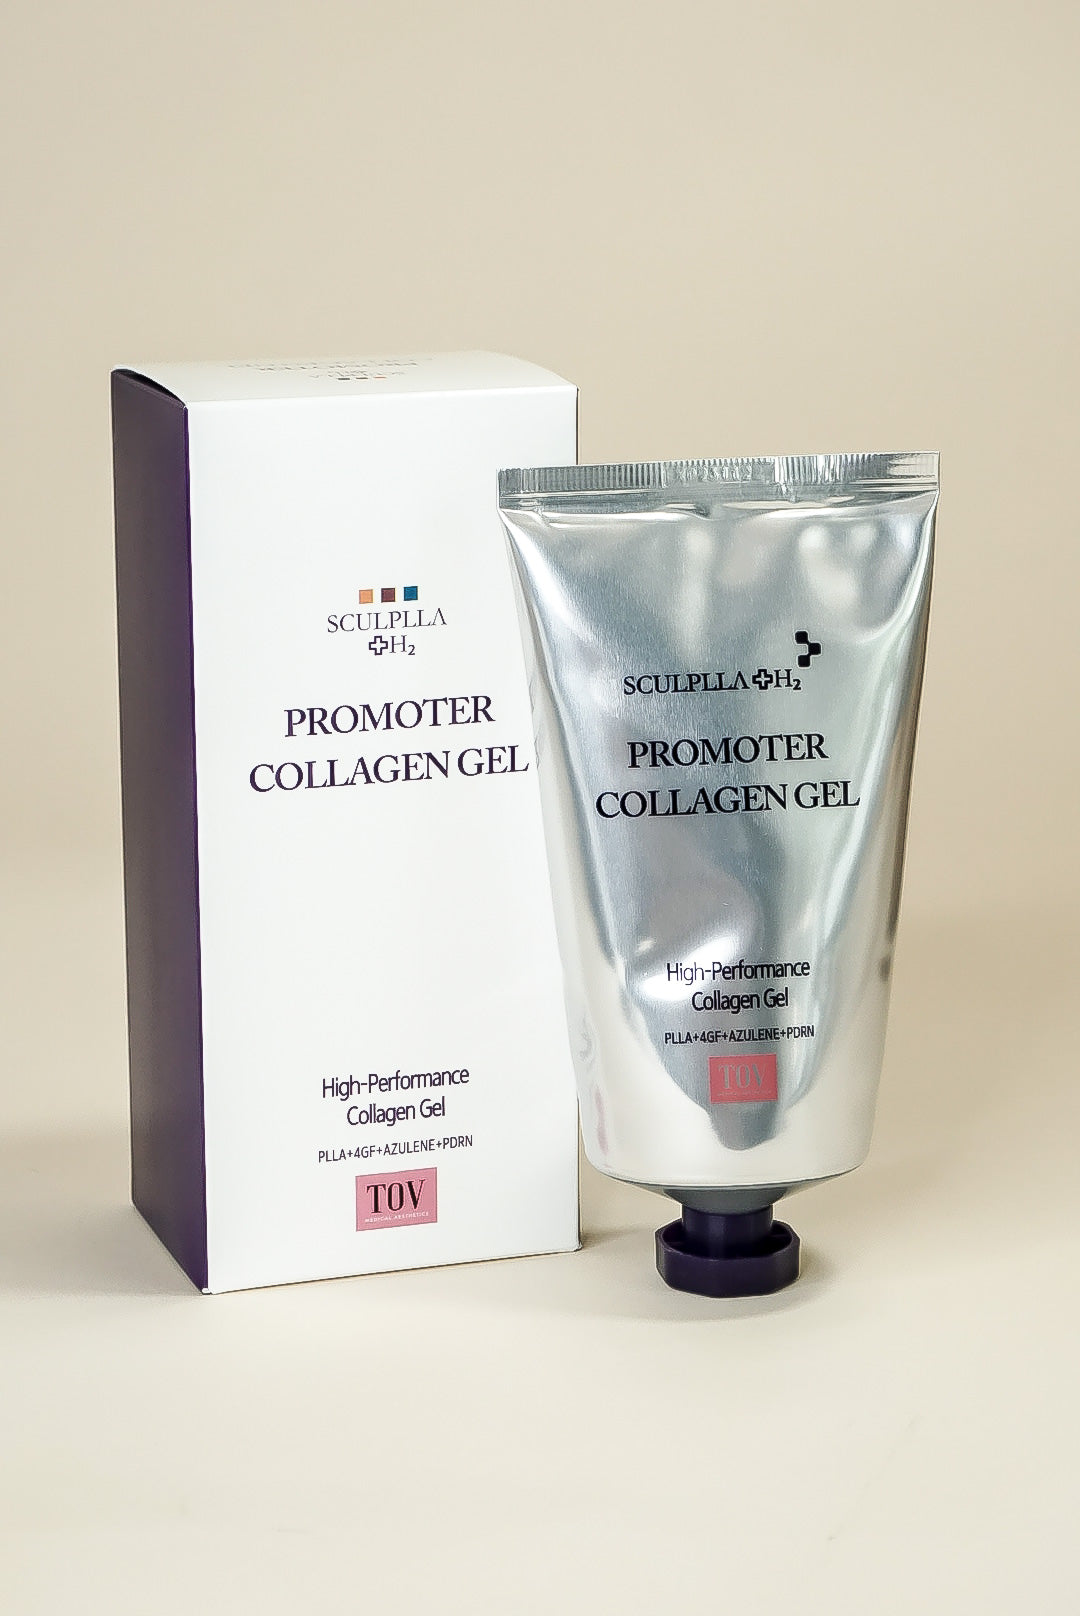 Load image into Gallery viewer, Time Master Pro with Sculplla Promoter Collagen Gel |  SkinJourney
